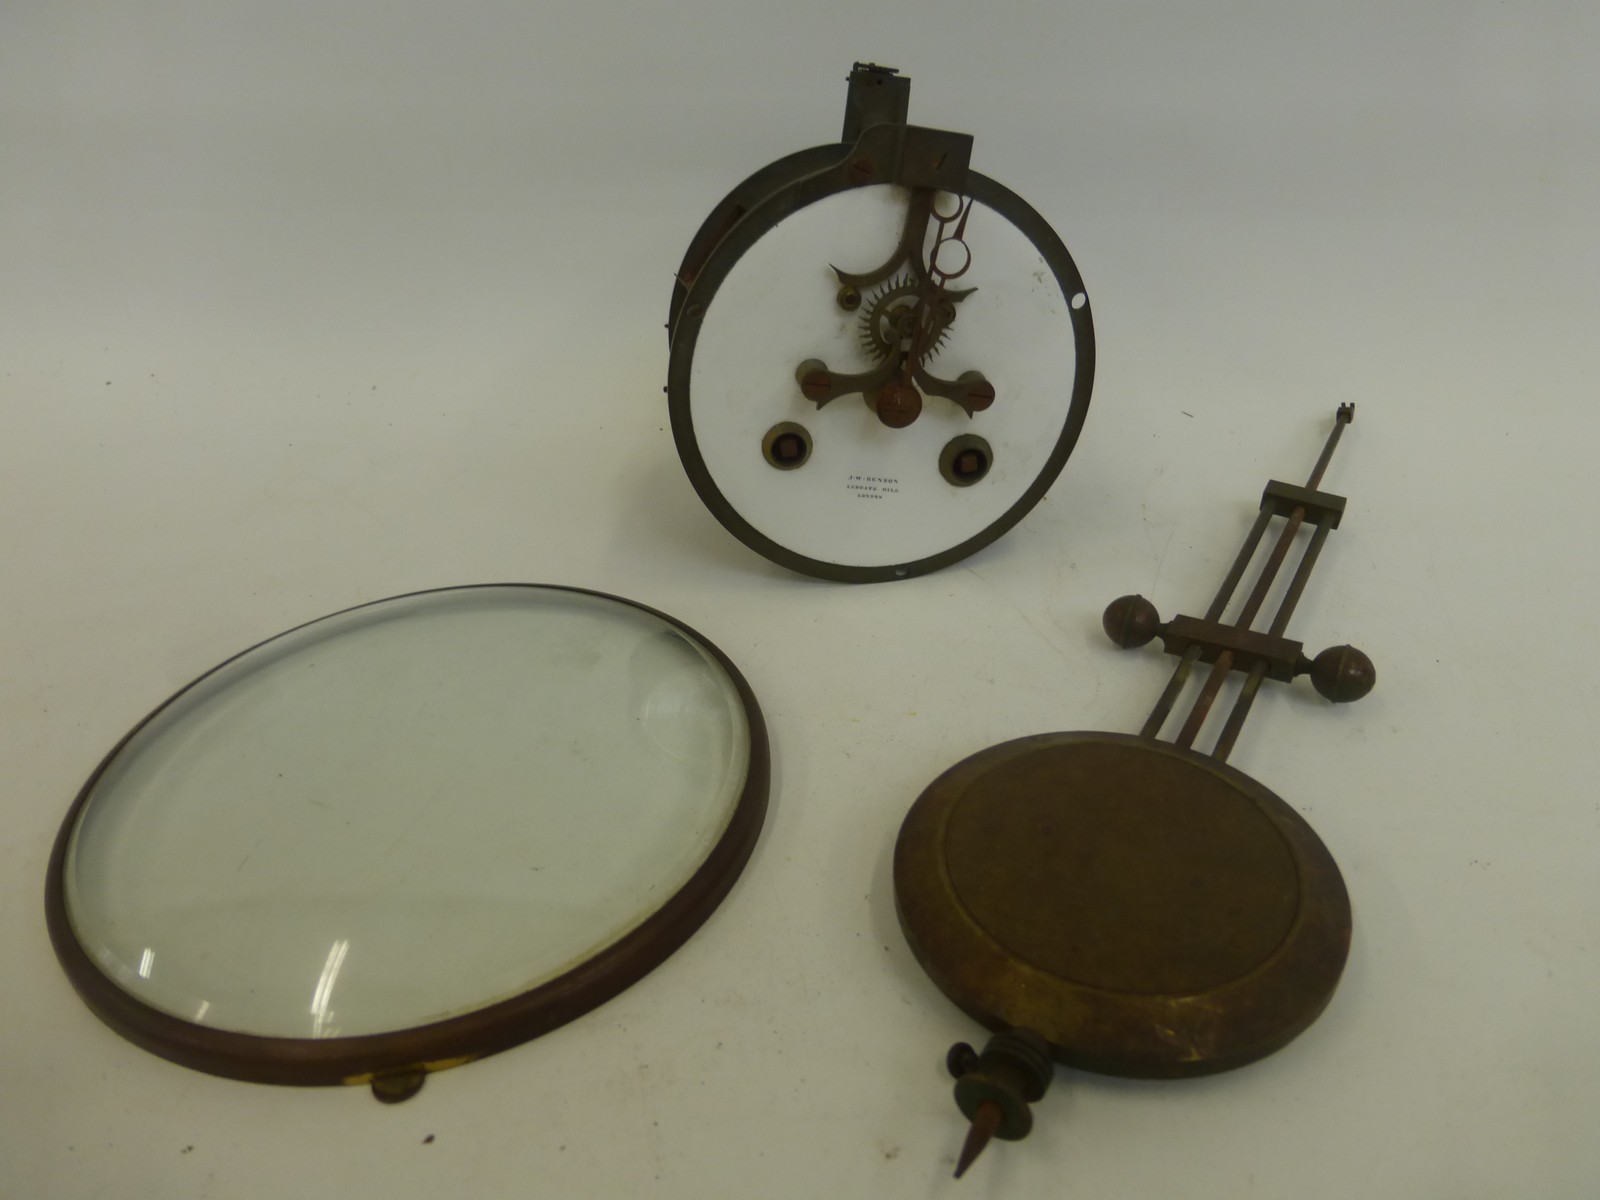 A 19th Century French clock movement with dead beat escapement, inscribed J.W. Benson, Ludgate Hill,